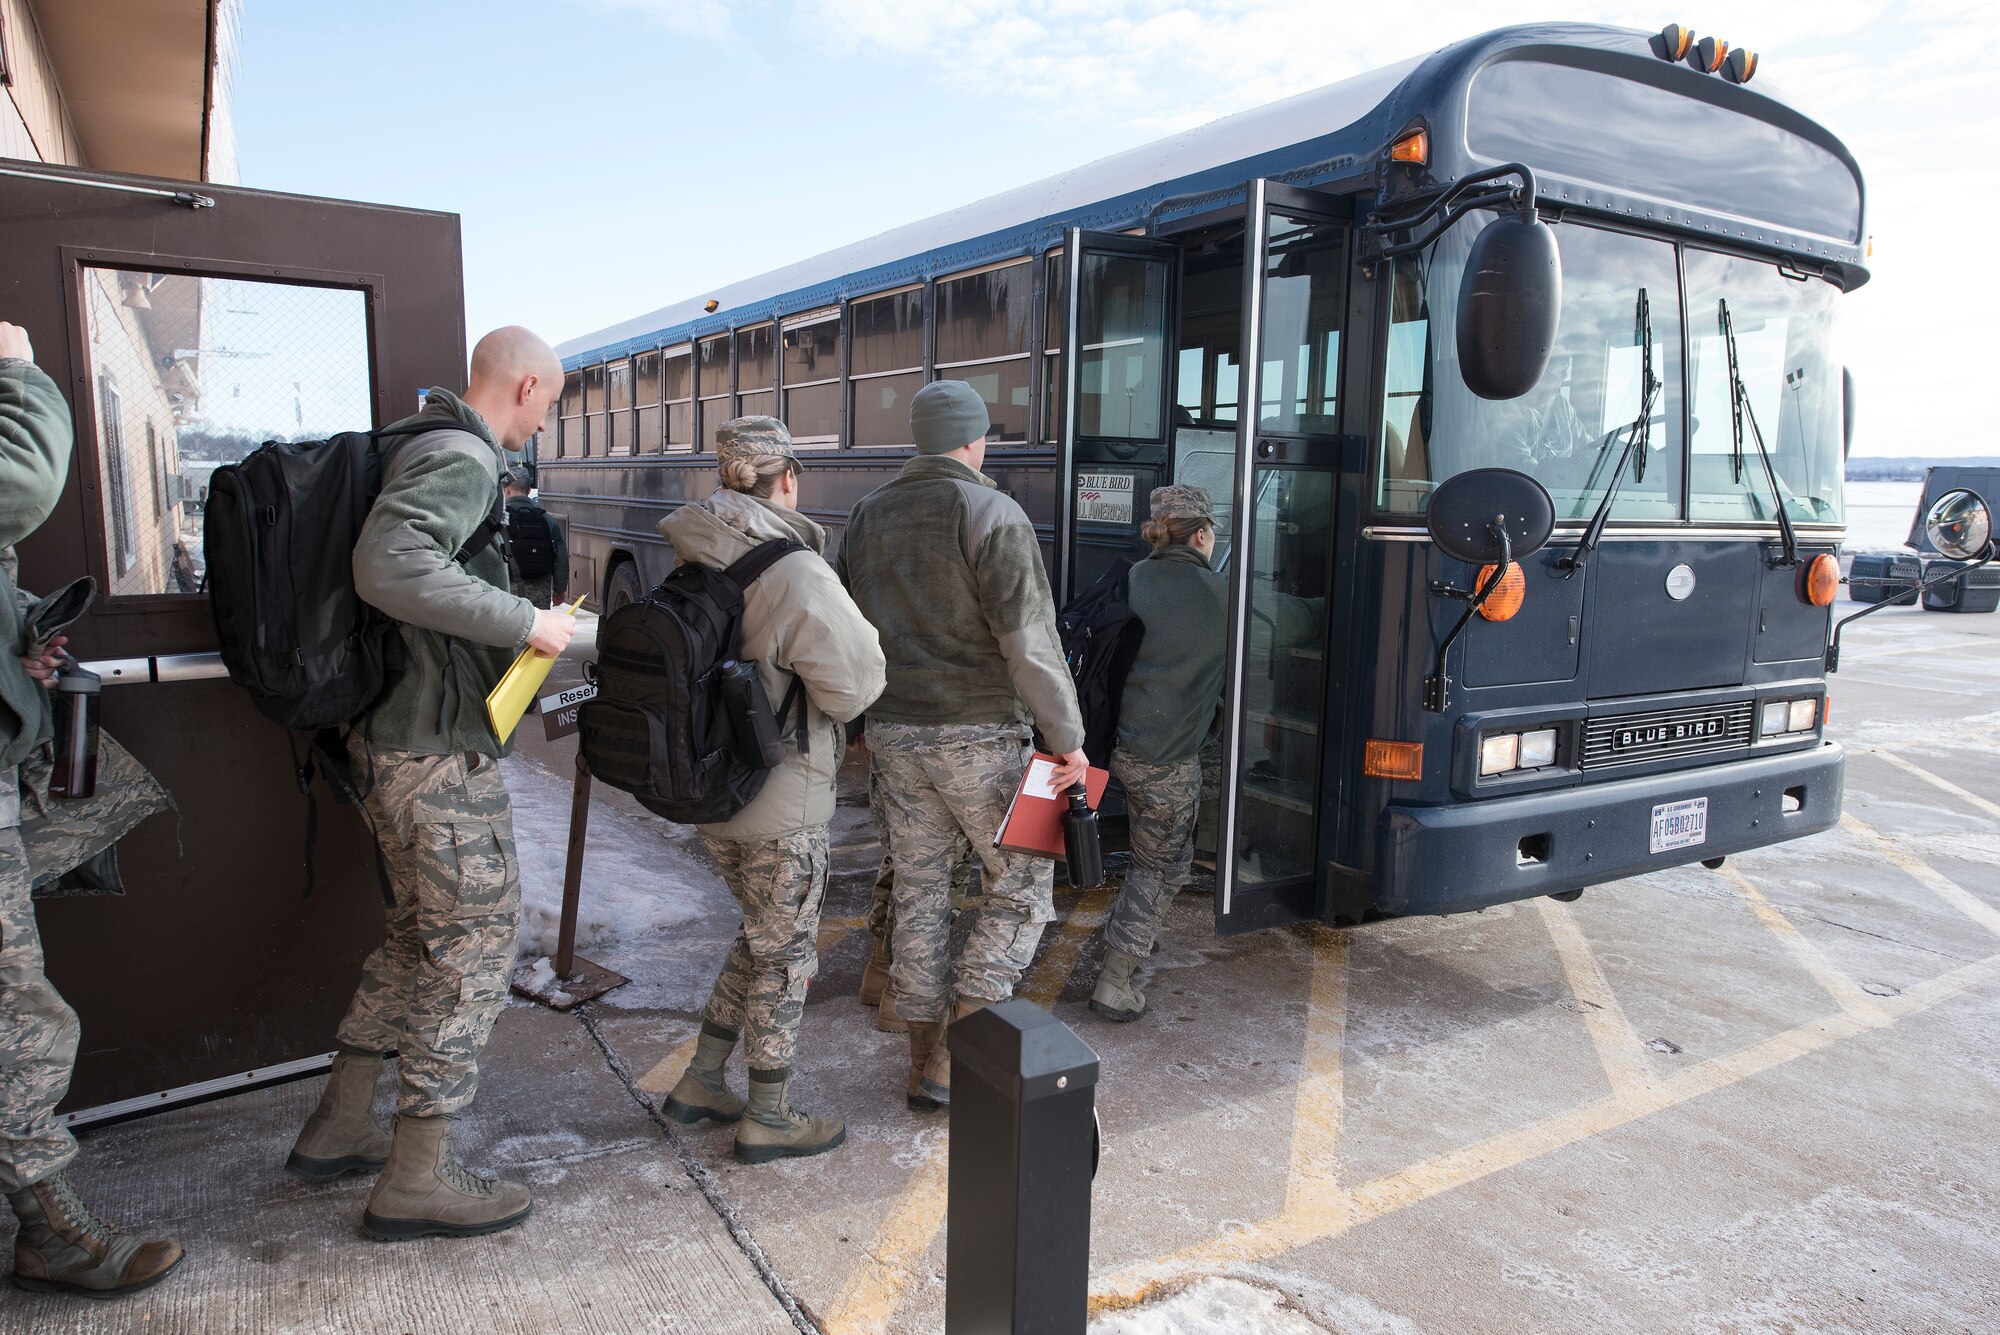 Offutt Airmen board a bus after processing through an exercise deployment line of the Installation Deployment Readiness Cell at Offutt Air Force Base, Nebraska Jan. 29, 2019. The members participated in Phase I of Operational Readiness Exercise Winter Havoc that tested Offutt’s ability to process and deploy a large amount of personnel and equipment on short notice. (U.S. Air Force photo by Delanie Stafford)